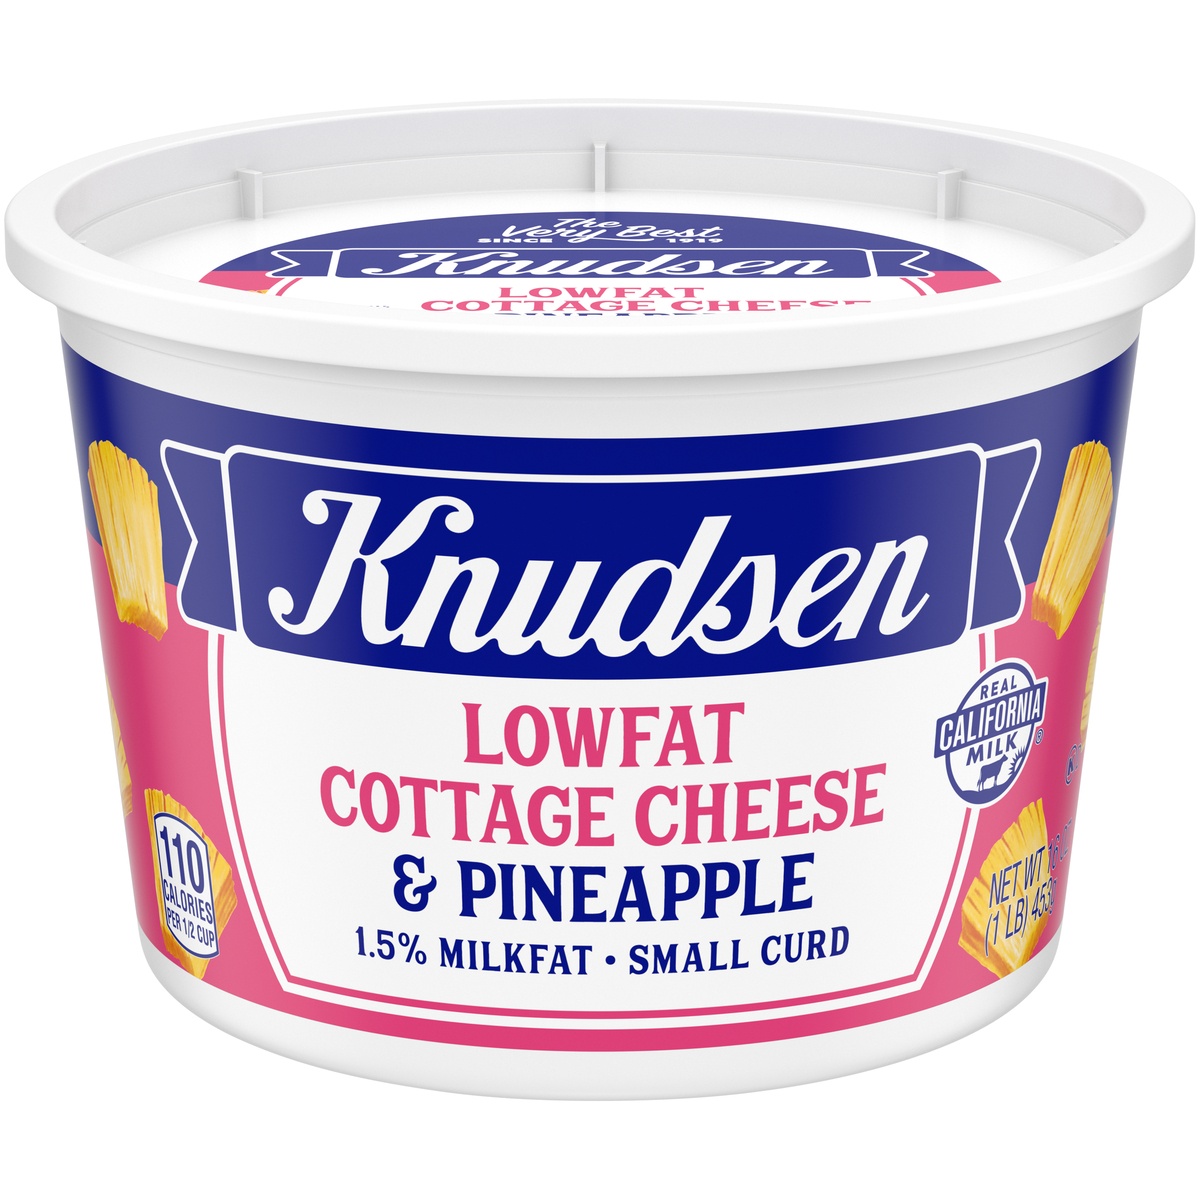 slide 1 of 6, Knudsen Lowfat Small Curd Cottage Cheese & Pineapple with 1.5% Milkfat Tub, 16 oz